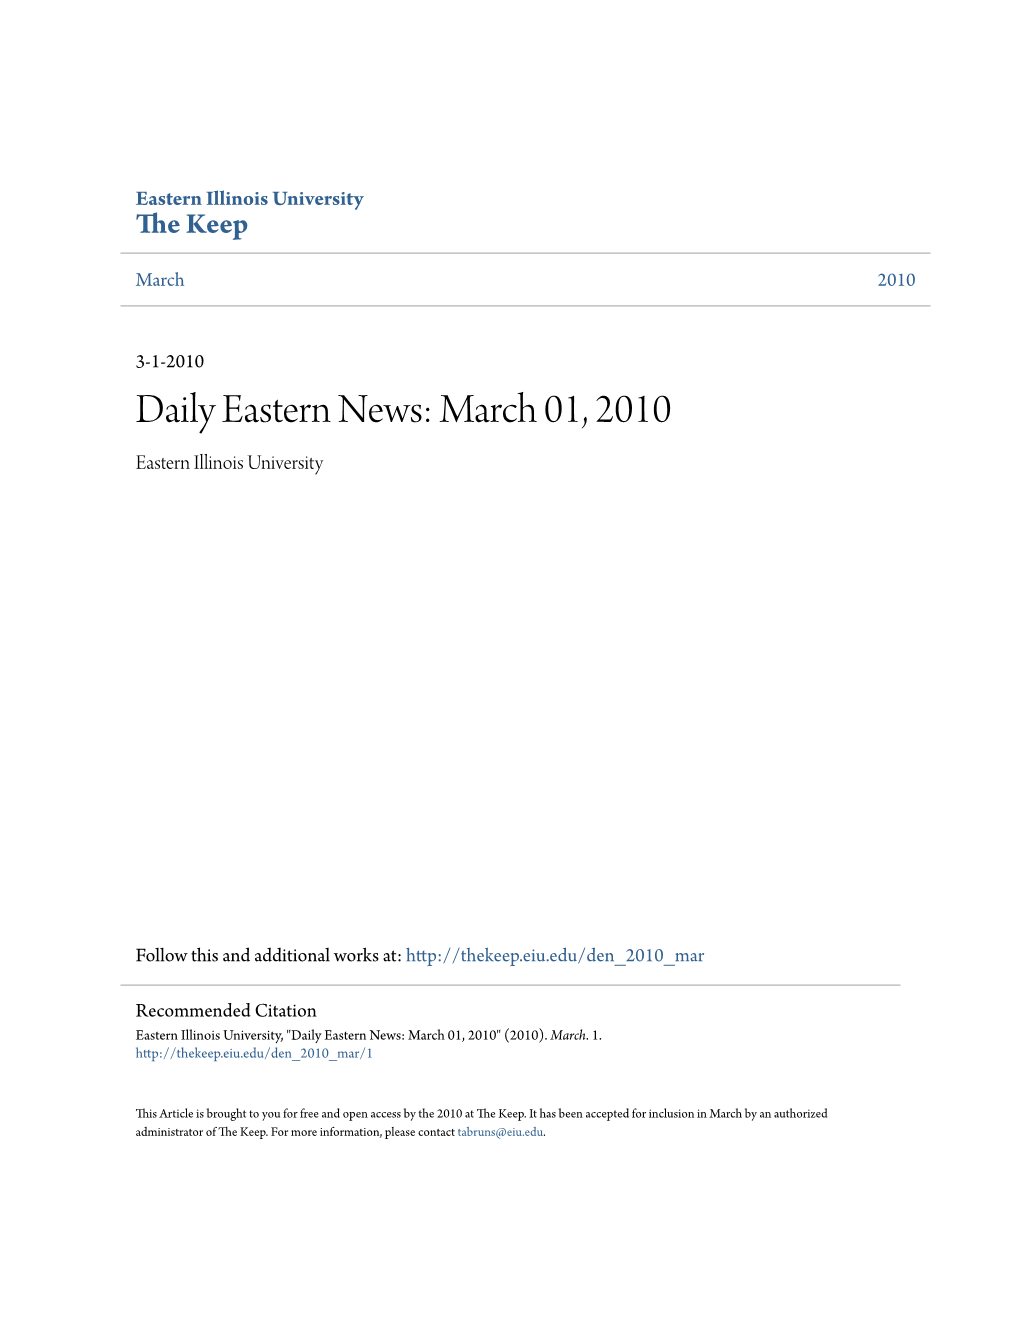 Daily Eastern News: March 01, 2010 Eastern Illinois University